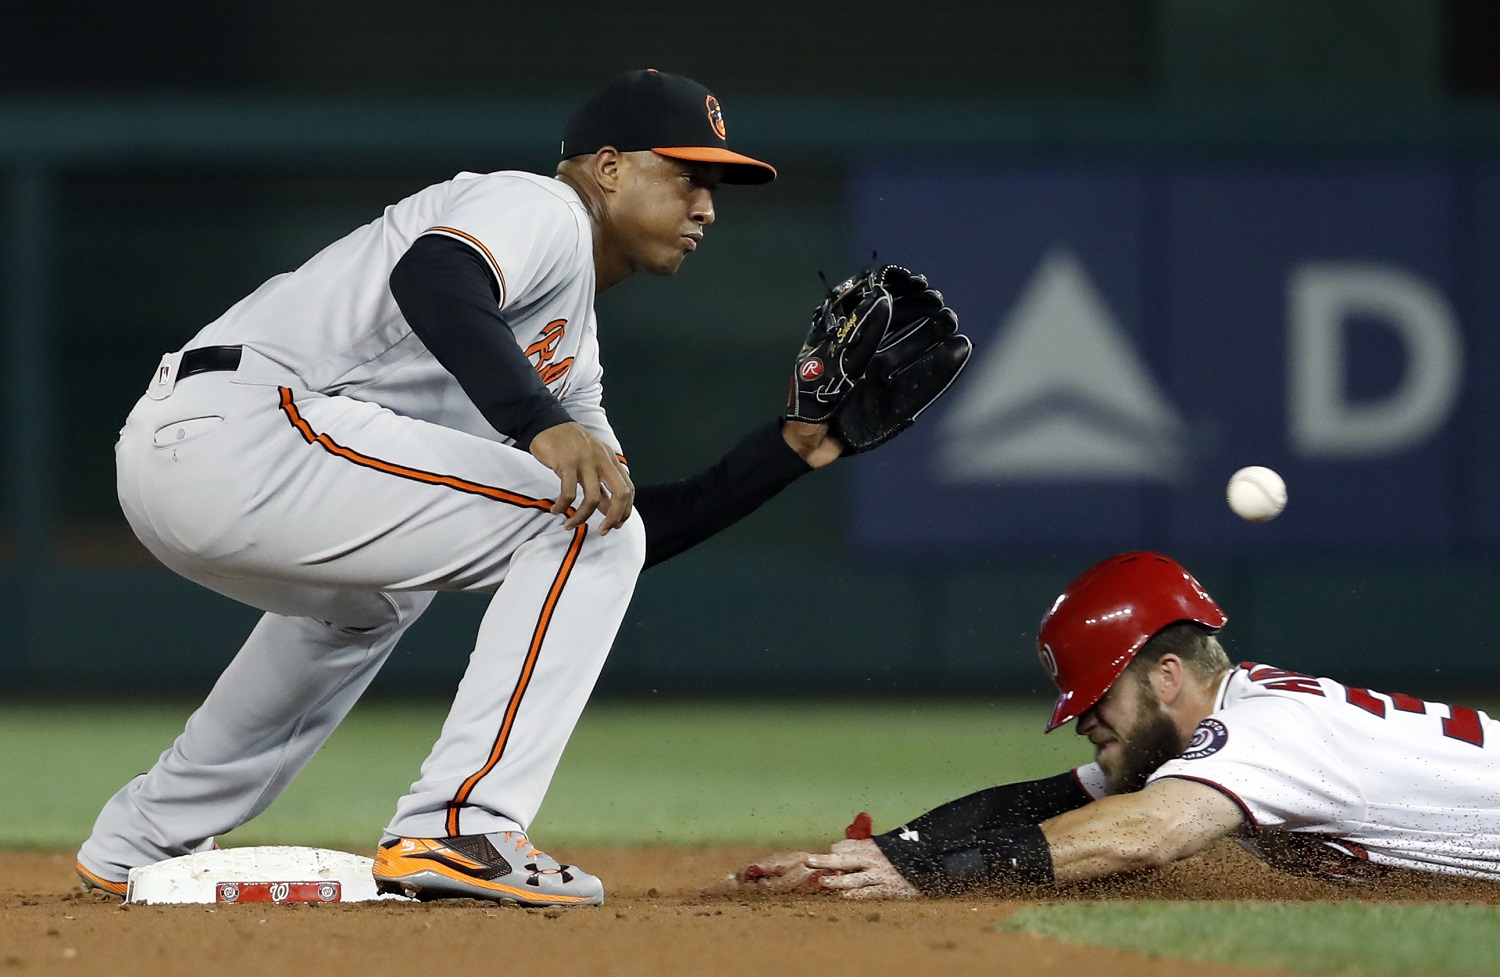 Washington Nationals' Bryce Harper safely steals second as Baltimore Orioles second baseman Jonathan Schoop waits for the throw during the fourth inning of a baseball game at Nationals Park Thursday, Aug. 25, 2016, in Washington. (AP Photo/Alex Brandon)